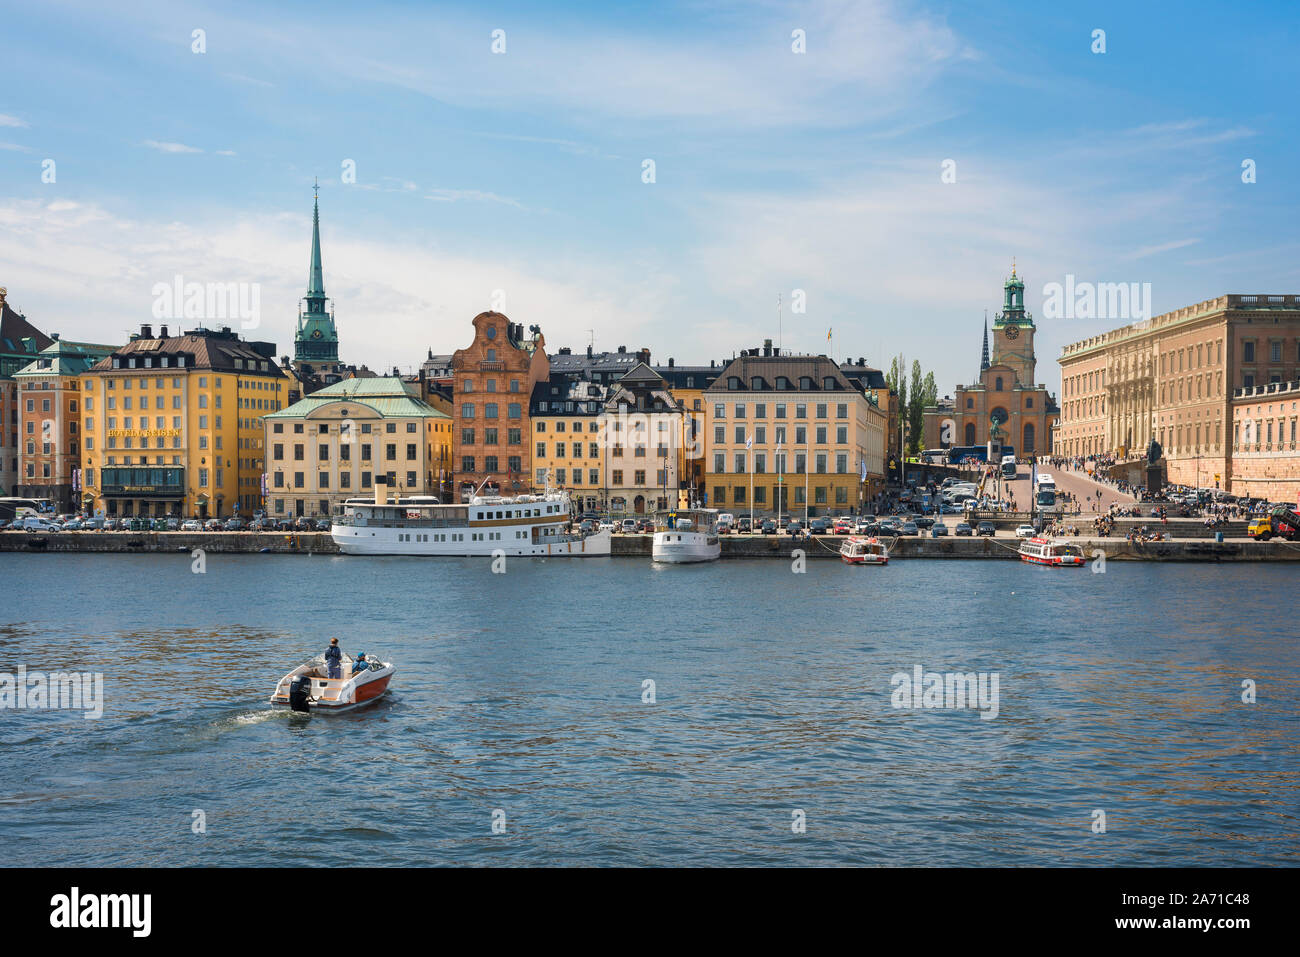 Stockholm Old Town, view in summer across Strommen lake towards the Stockholm old town (Gamla Stan) waterfront area and skyline, Sweden. Stock Photo